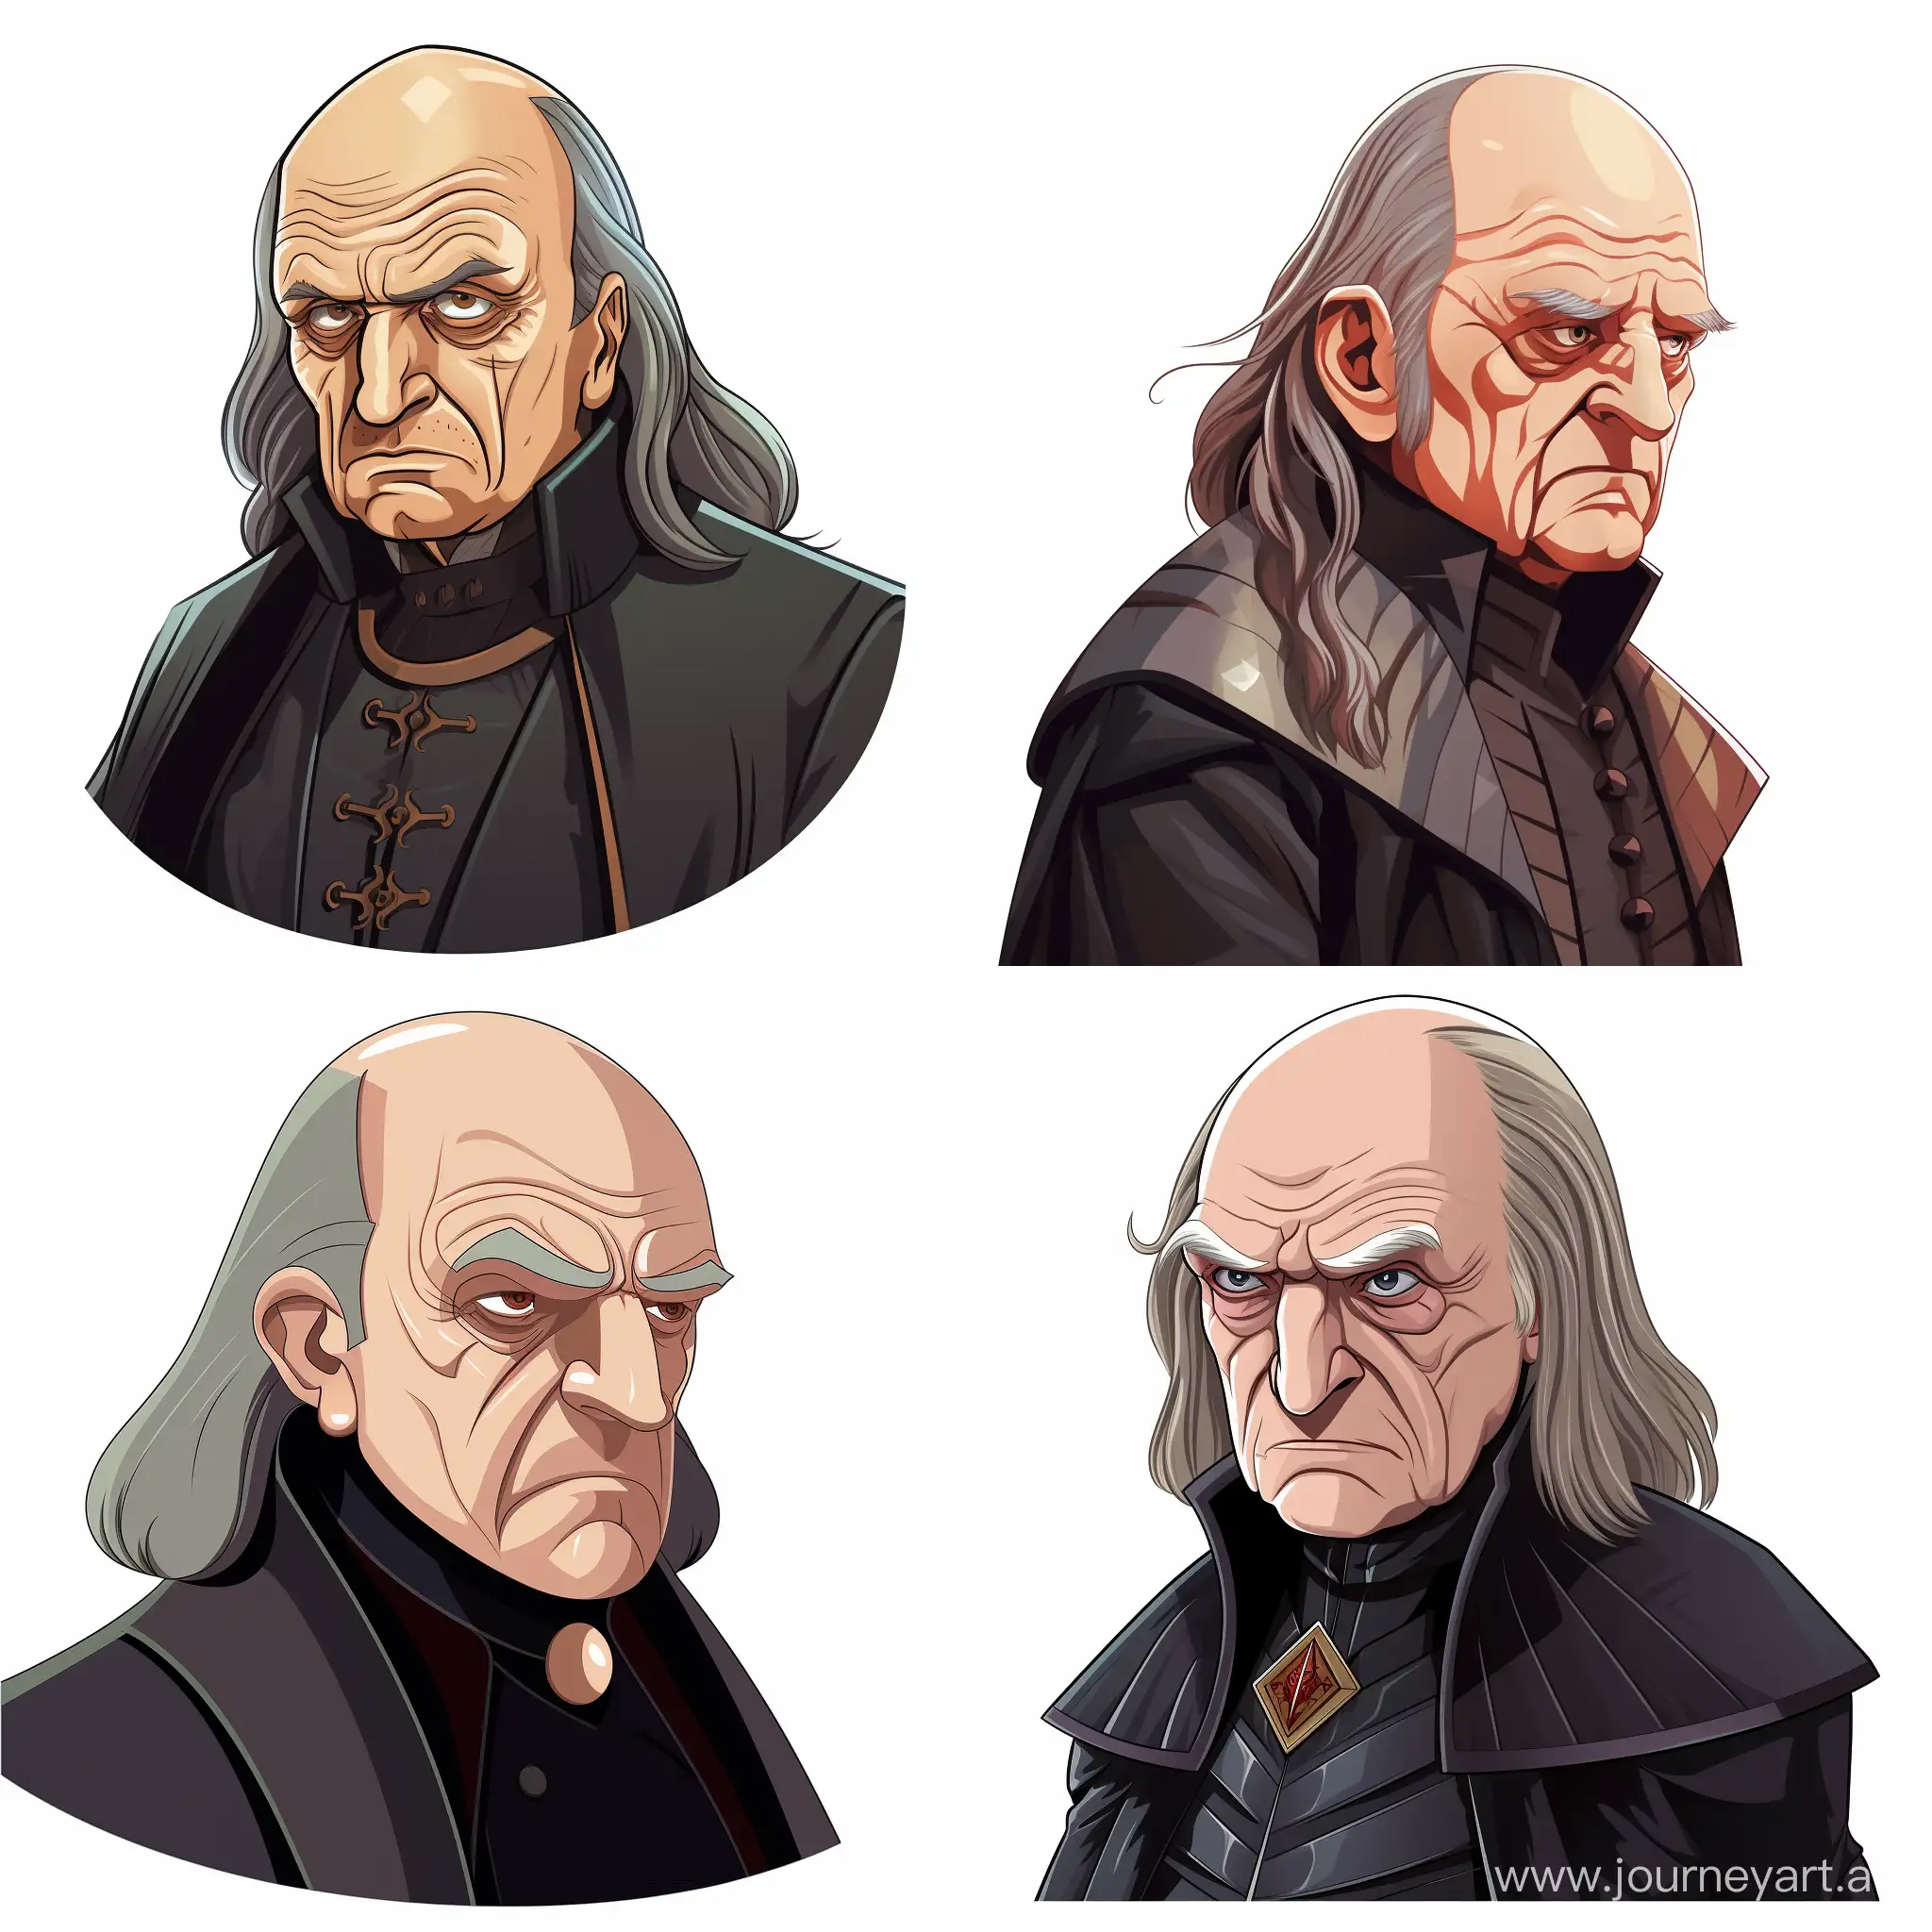 Argus Filch, with long gray hair, bald on top, looking like actor David John Bradley, on a white background, cartoon style, illustration